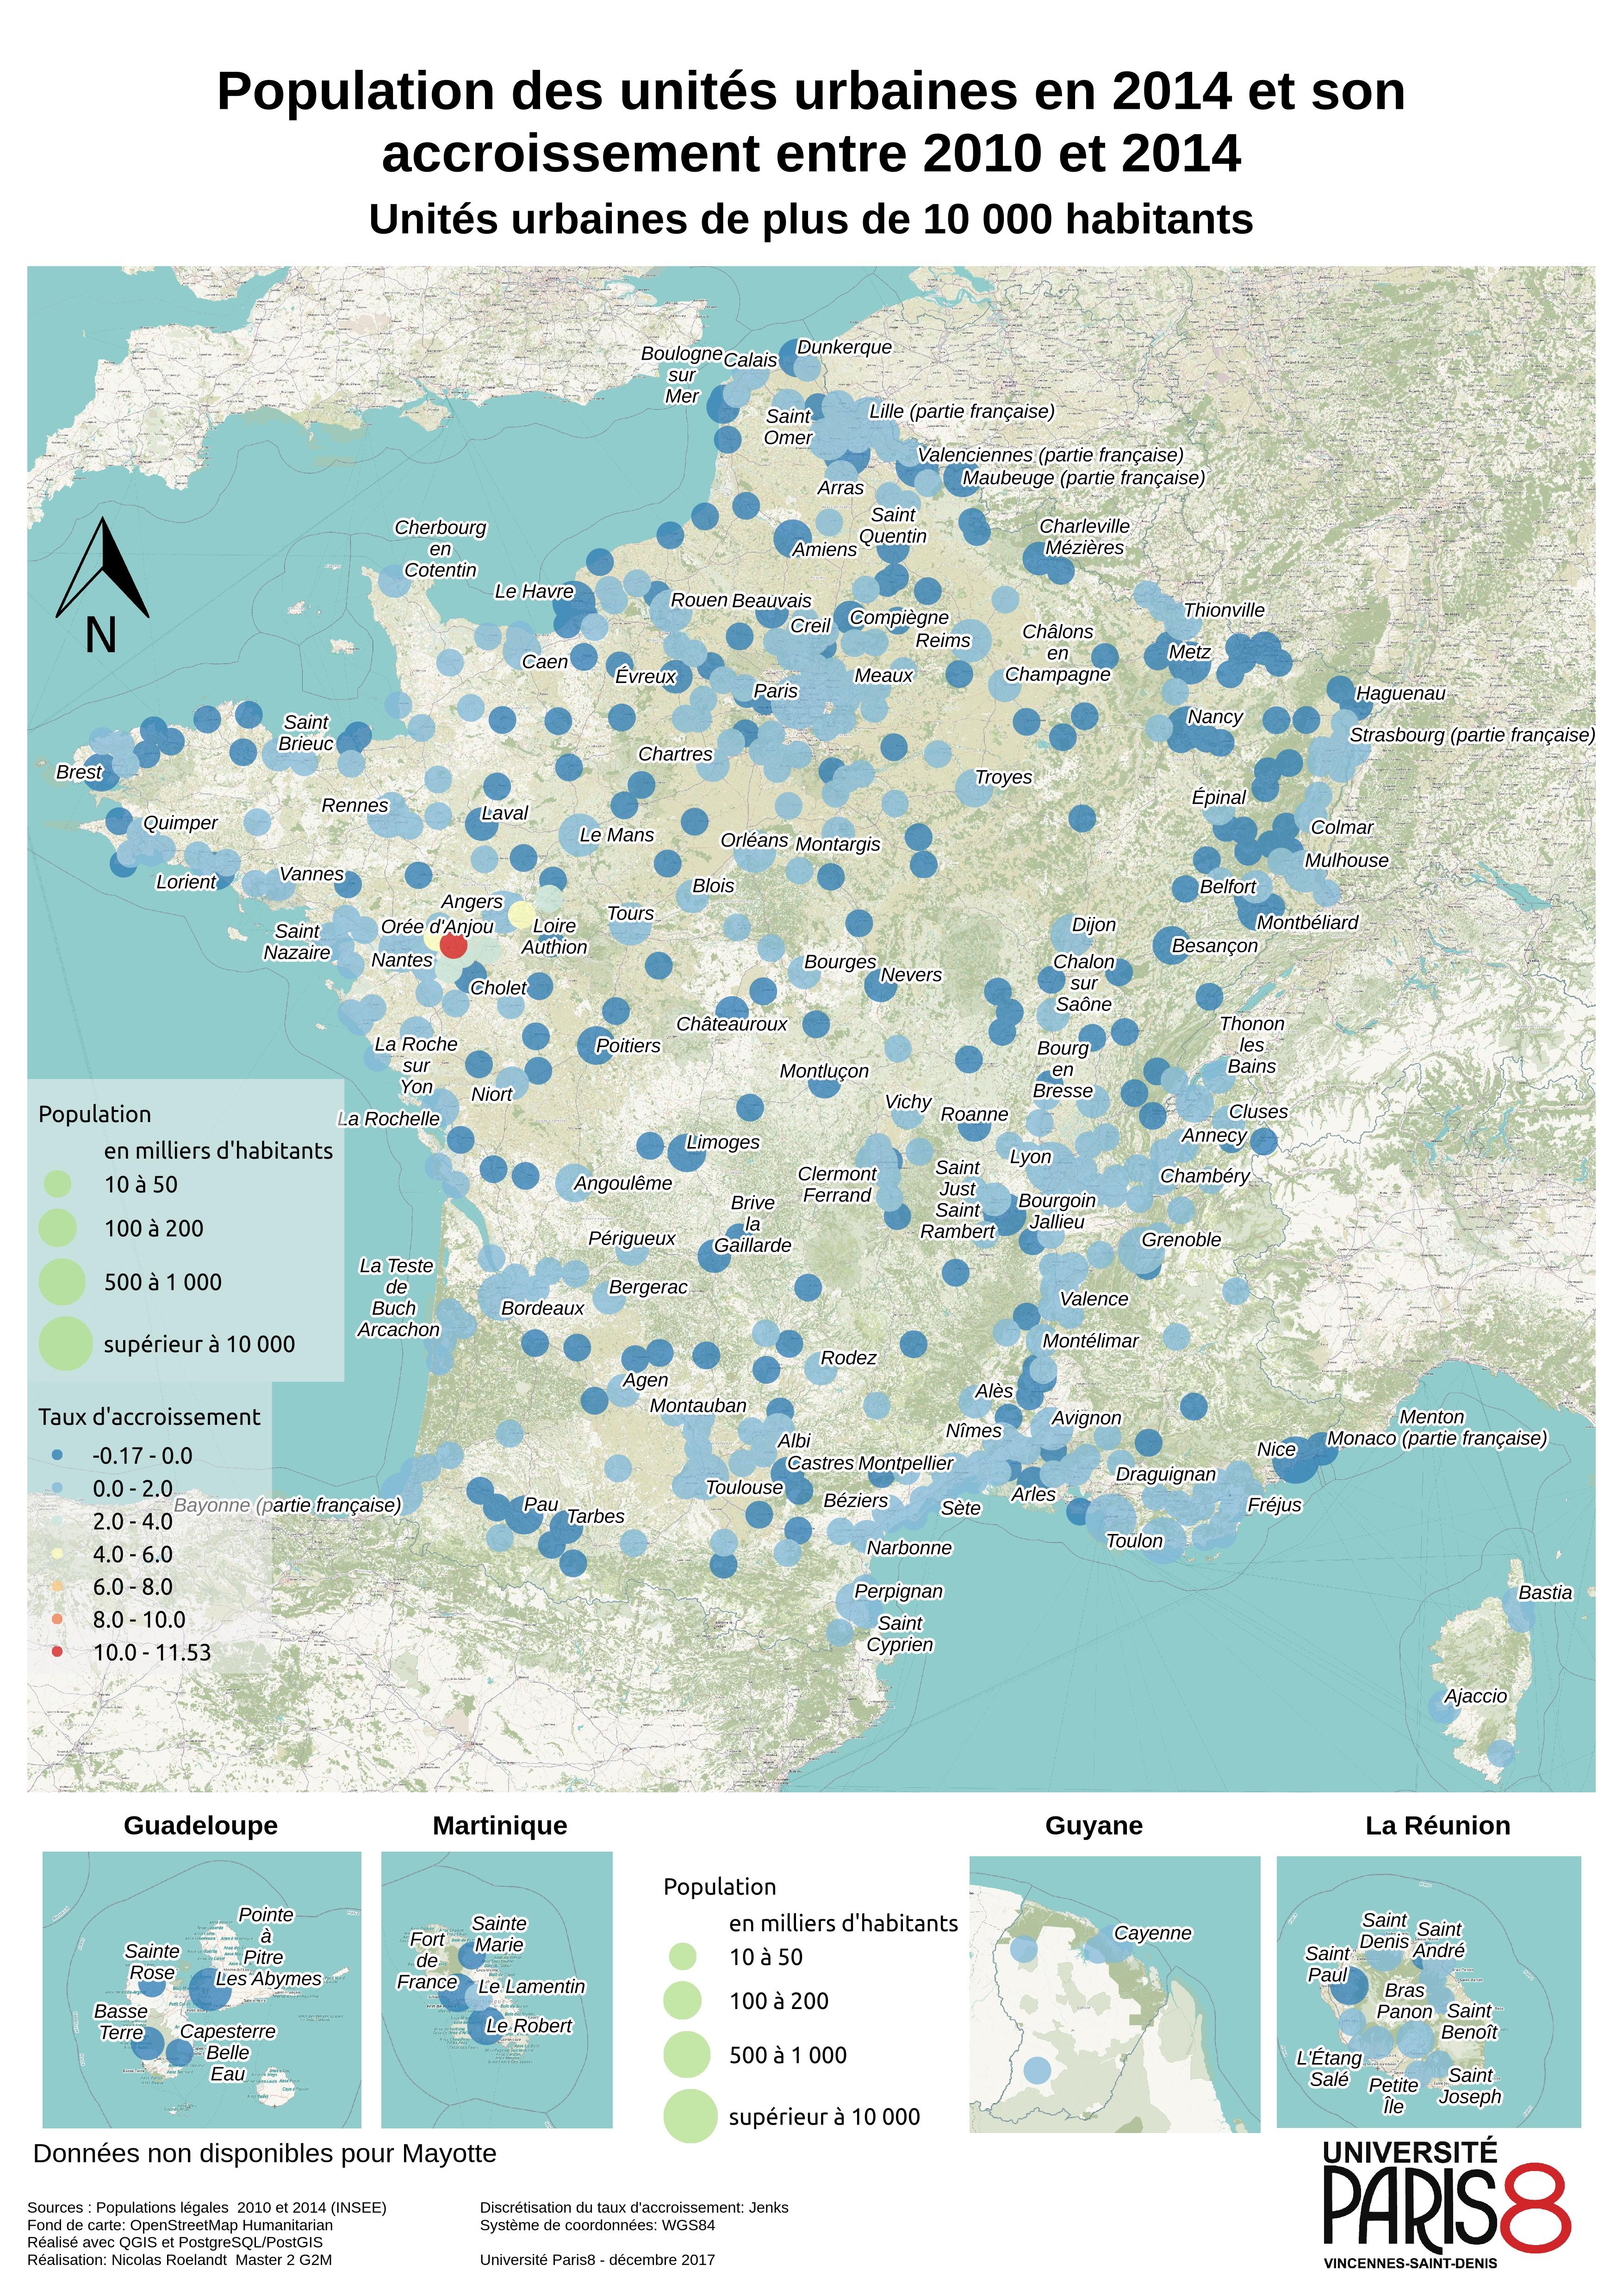 French Urban Population growth between 2010 and 2014 map